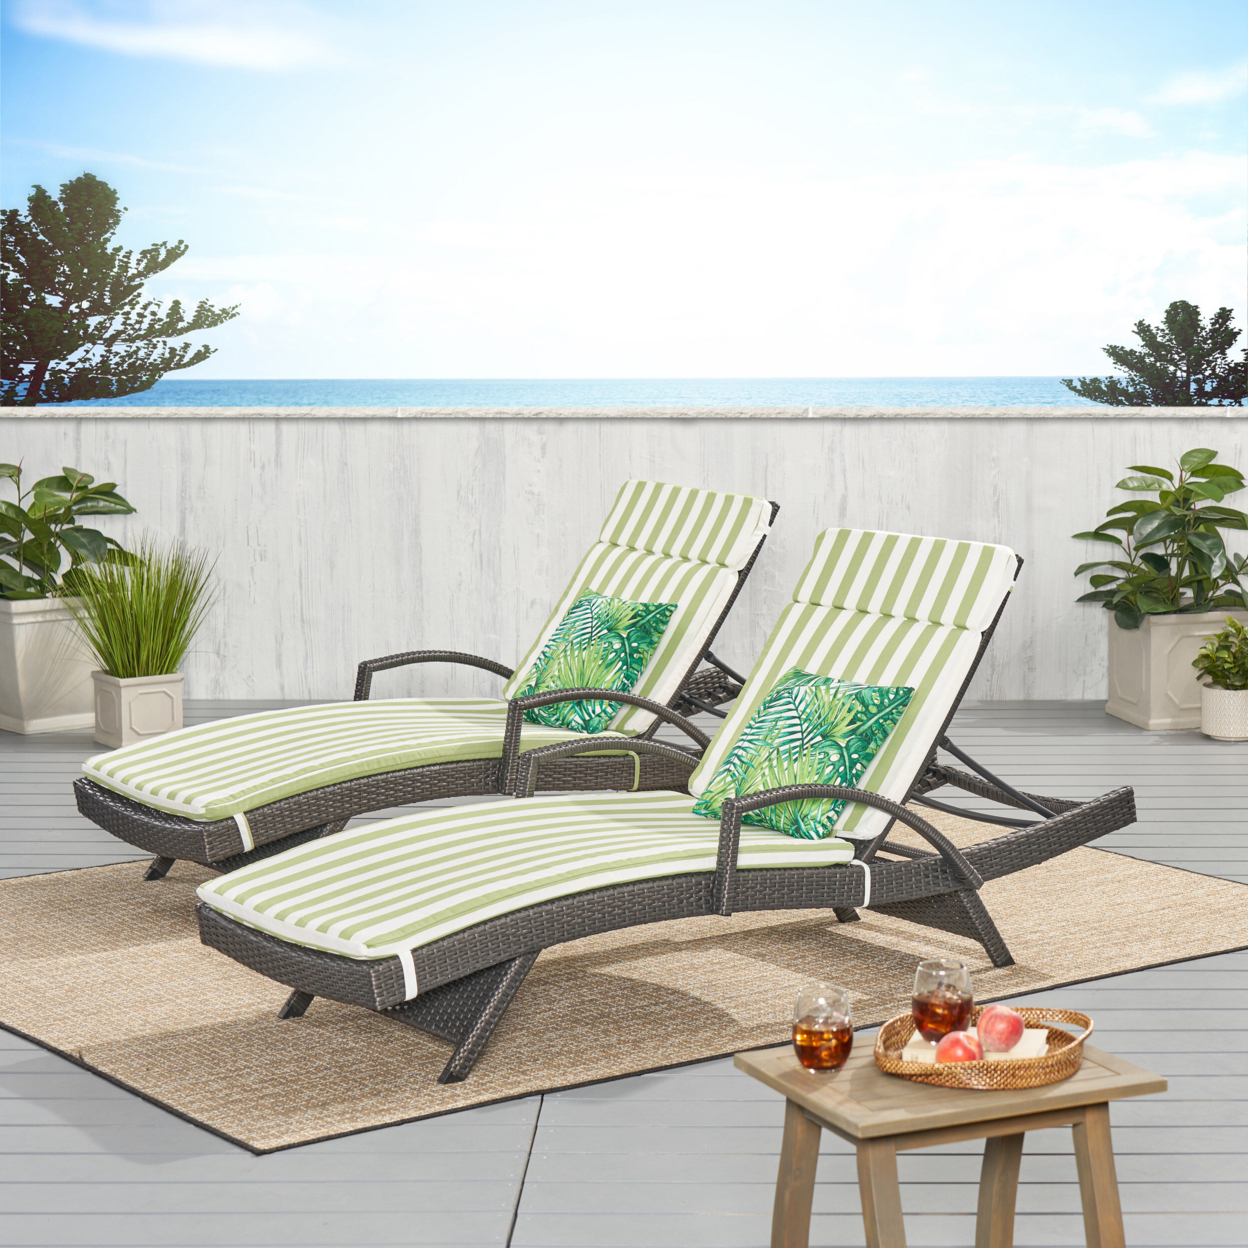 Soleil Outdoor Wicker Chaise Lounges With Water Resistant Cushions (Set Of 2) - Orange